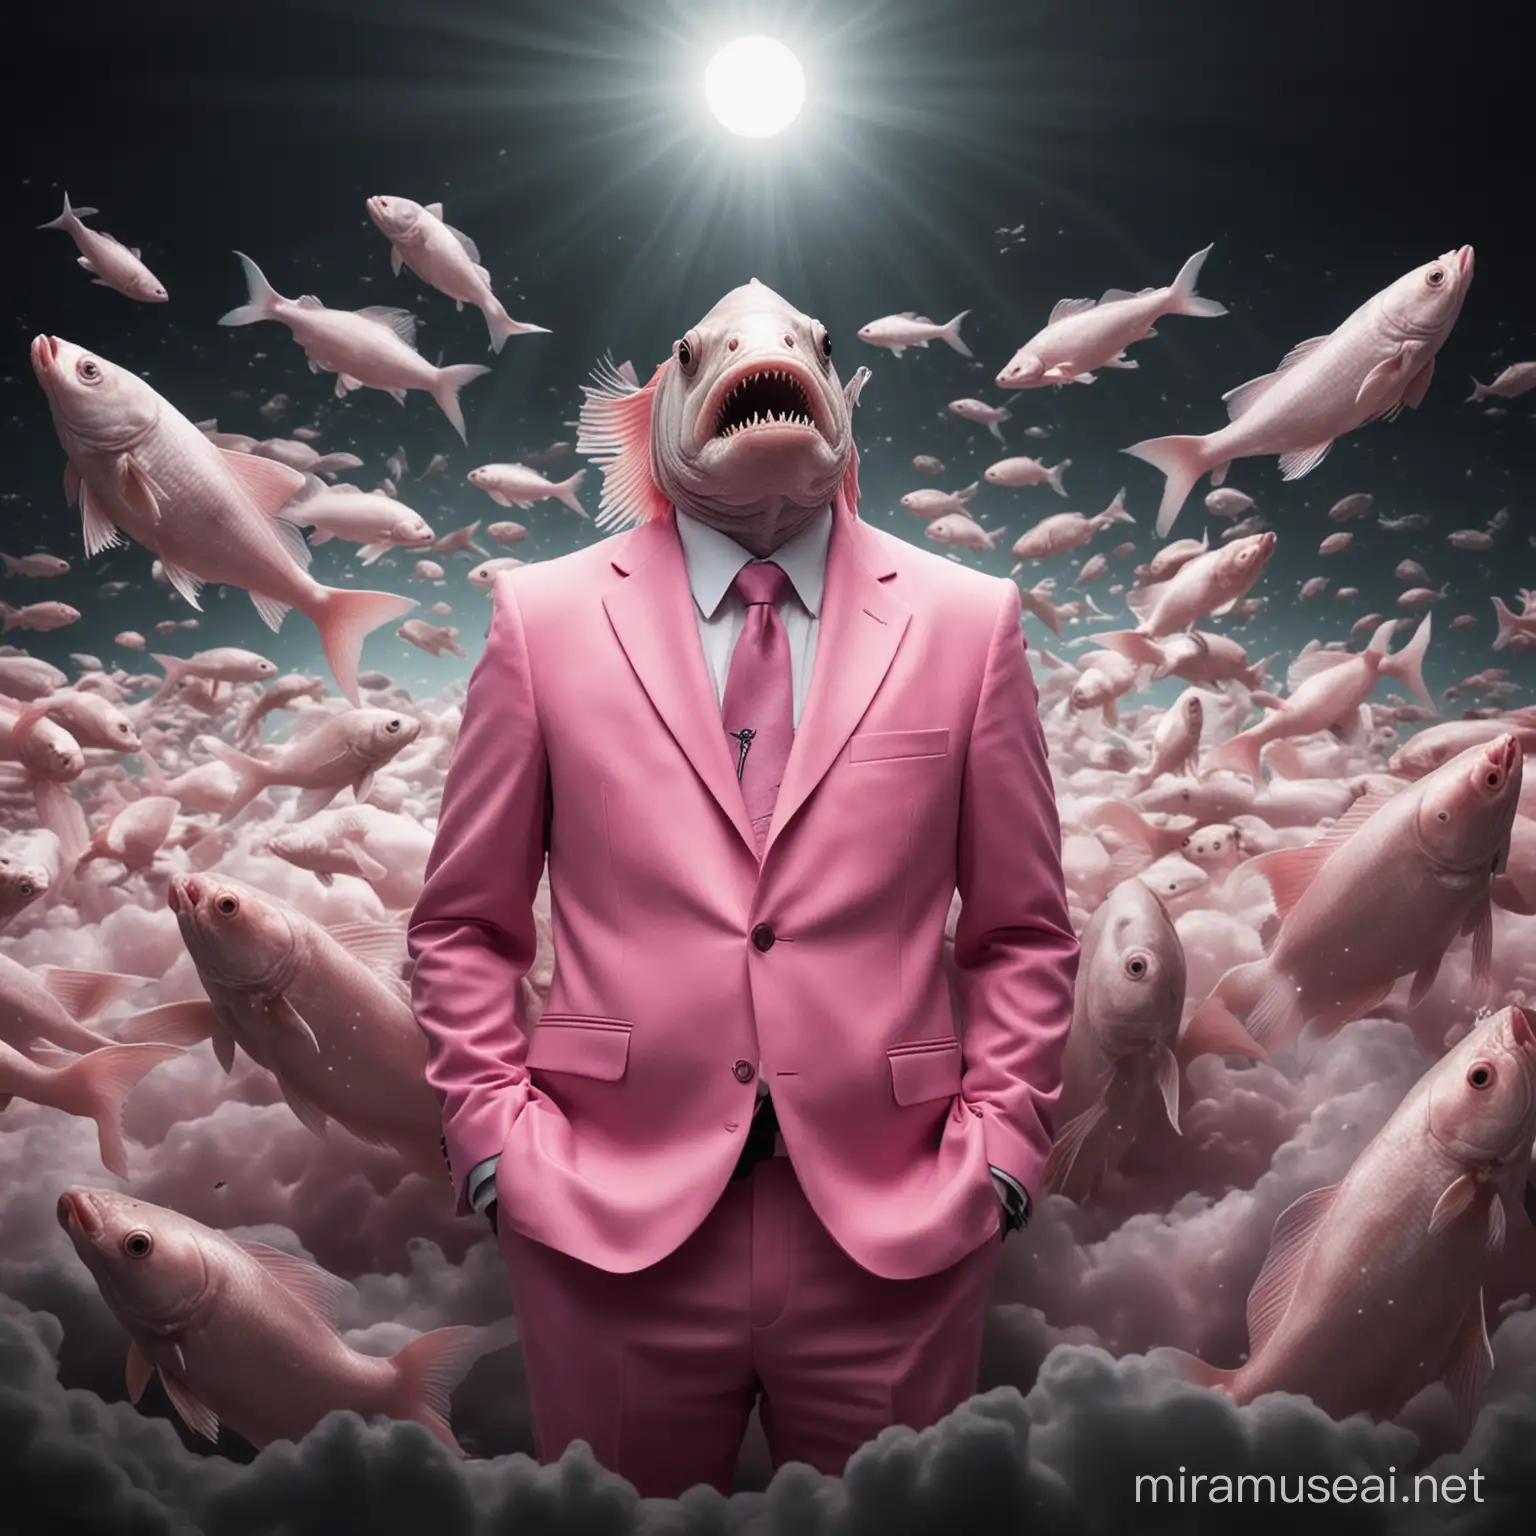 Surreal Illustration Pink Suit Fish in Heavenly Darkness